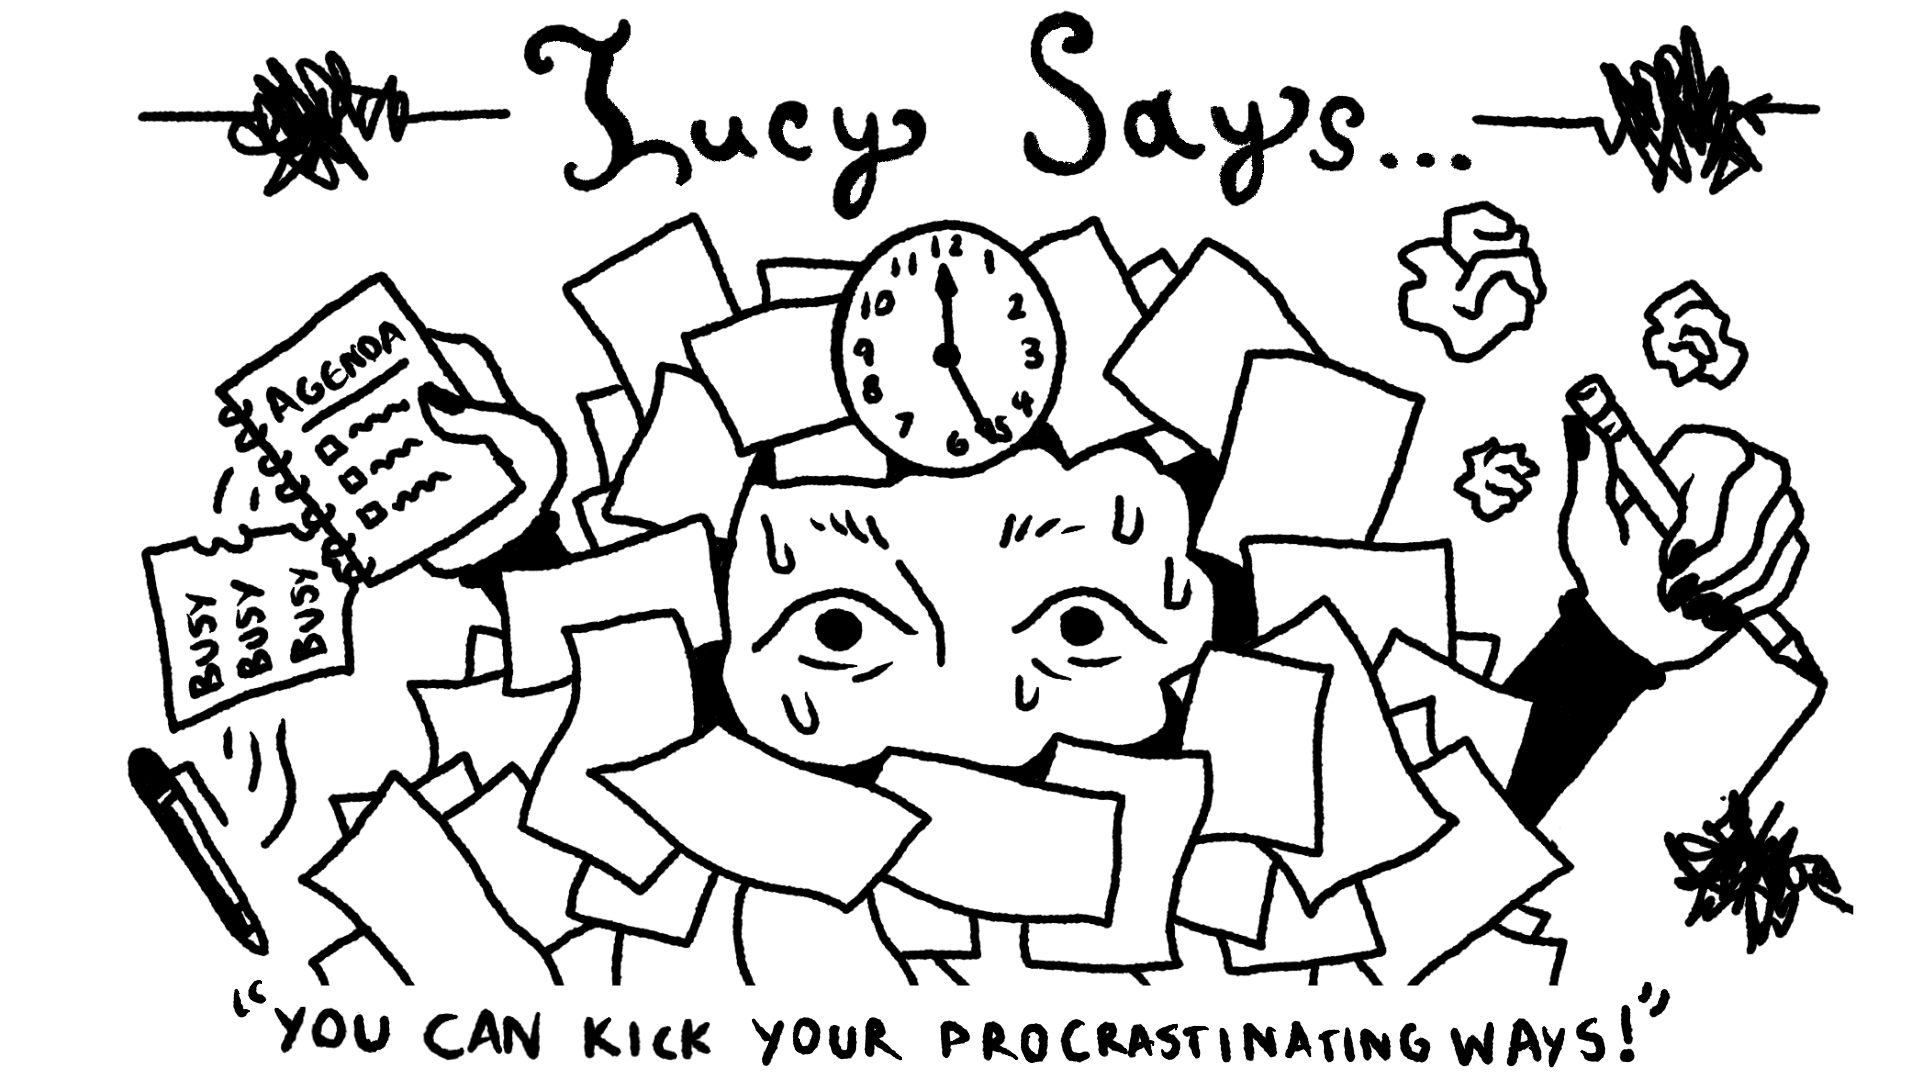 Illustration of a person's eyes are shrouded by paper with “busy, busy, busy” written, ticking clocks, and agendas. Text reads “Lucy says… you can kick your procrastinating ways!”